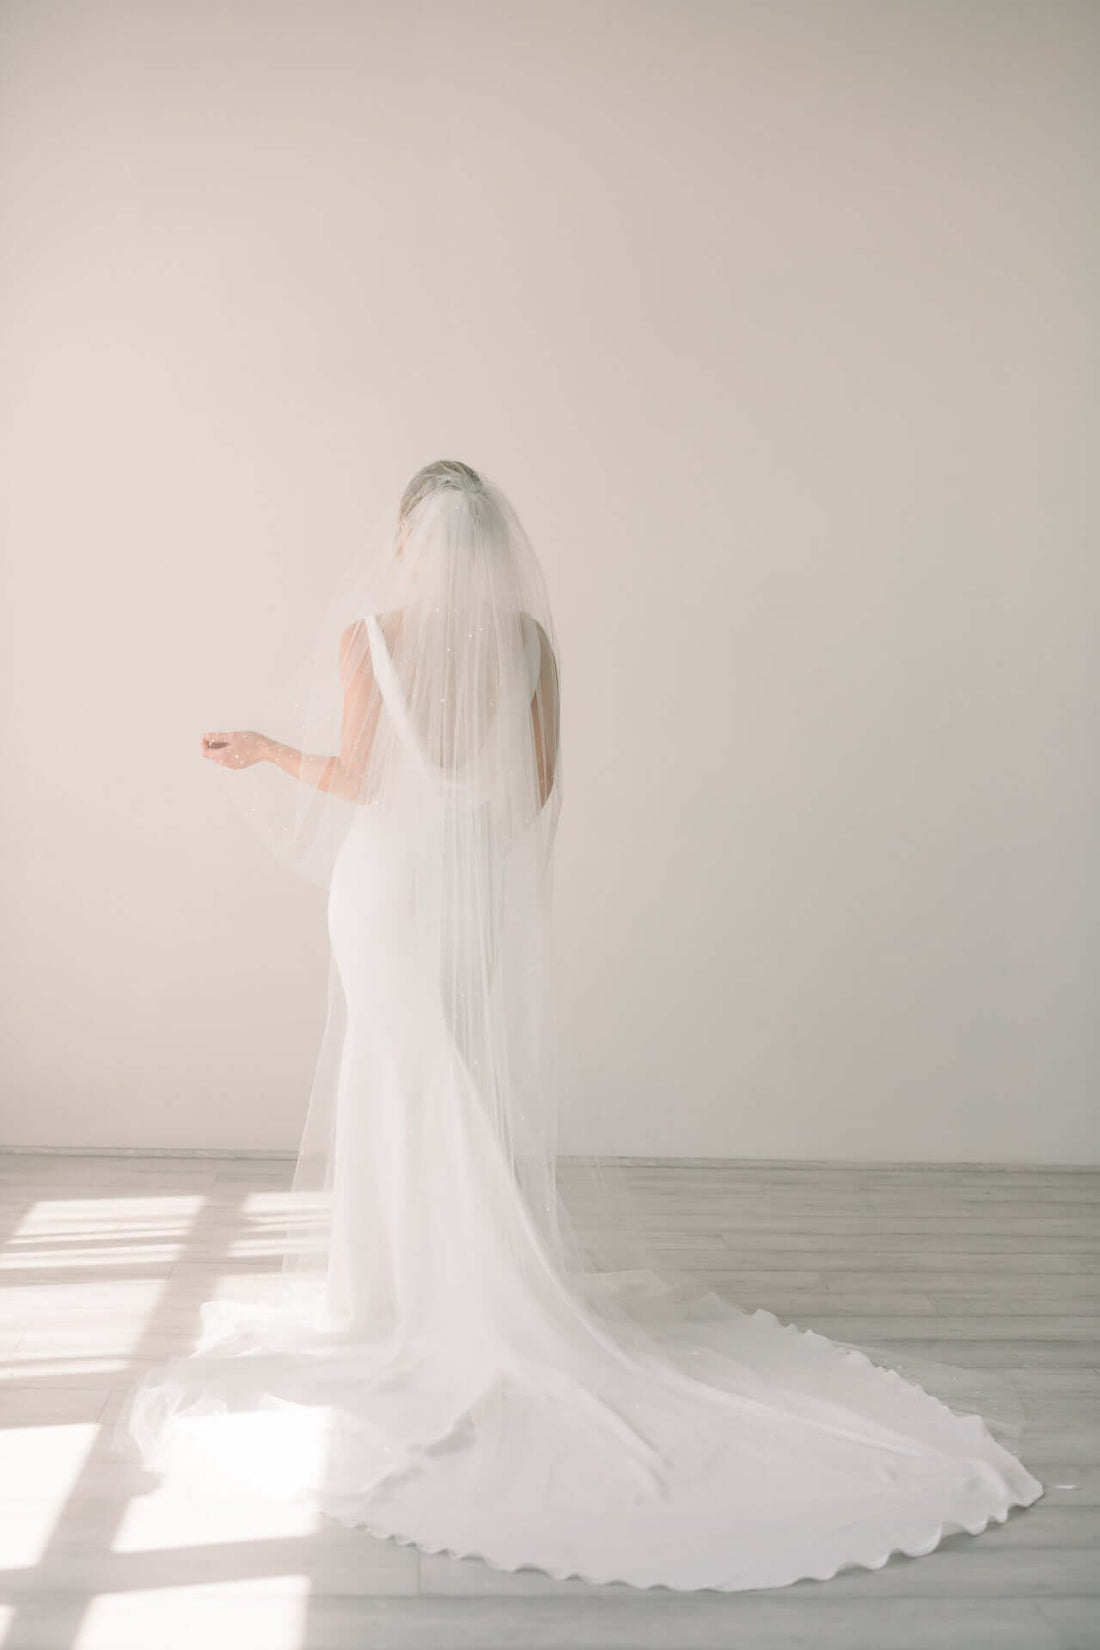 Should the veil go over or behind your shoulders?